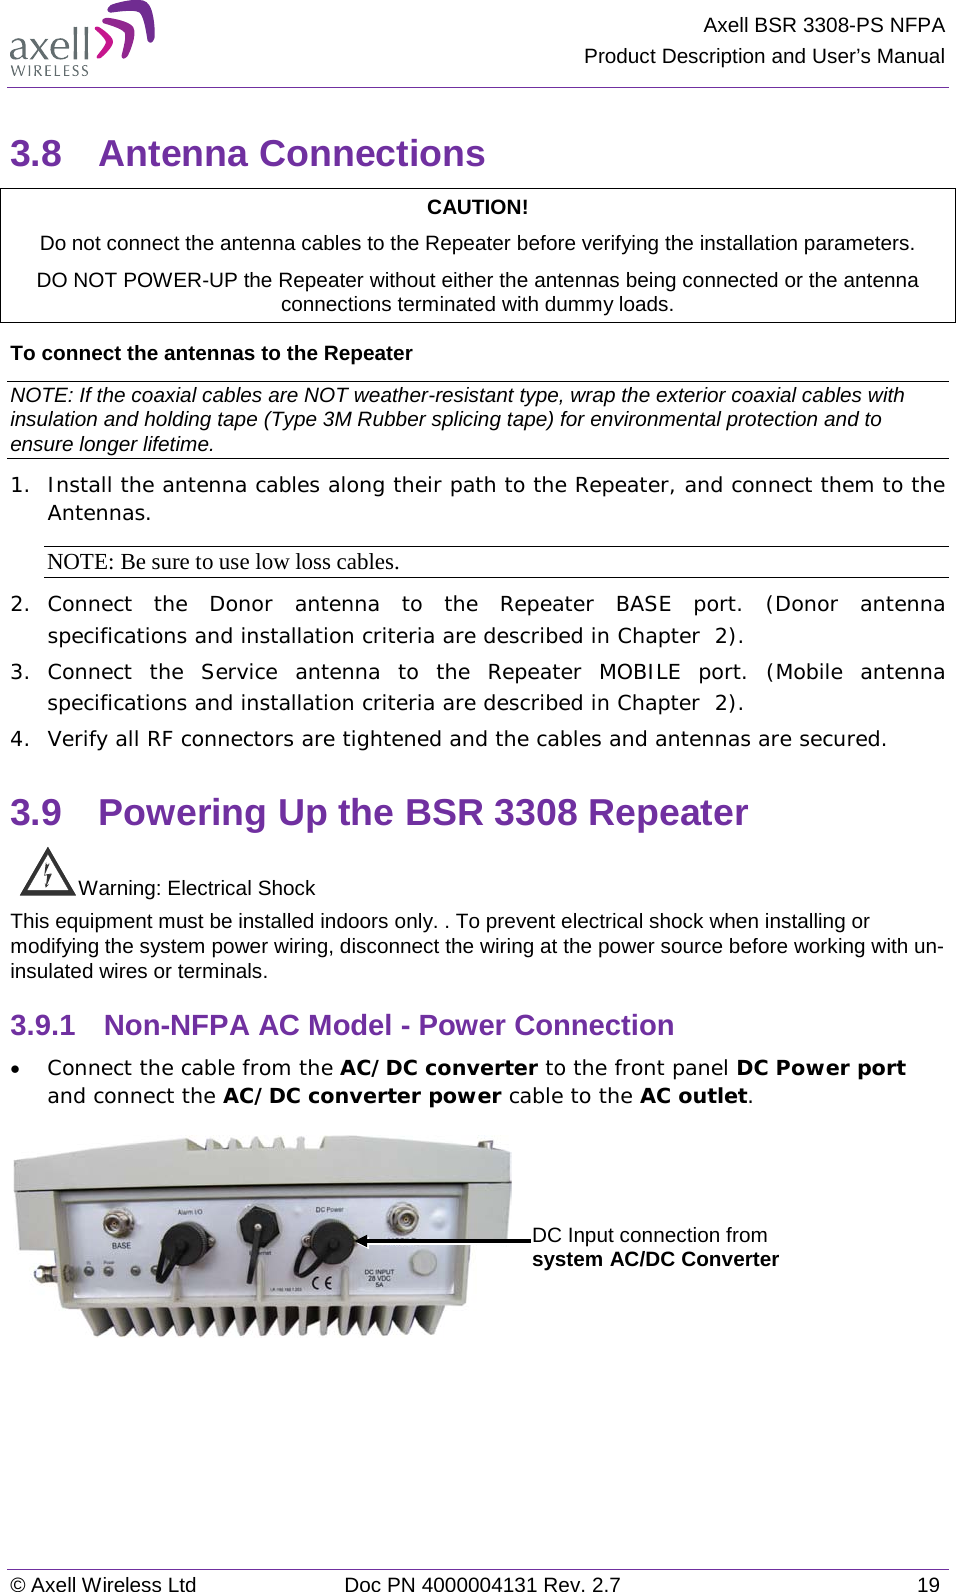 Axell BSR 3308-PS NFPA Product Description and User’s Manual © Axell Wireless Ltd Doc PN 4000004131 Rev. 2.7 19 3.8  Antenna Connections CAUTION! Do not connect the antenna cables to the Repeater before verifying the installation parameters. DO NOT POWER-UP the Repeater without either the antennas being connected or the antenna connections terminated with dummy loads.  To connect the antennas to the Repeater NOTE: If the coaxial cables are NOT weather-resistant type, wrap the exterior coaxial cables with insulation and holding tape (Type 3M Rubber splicing tape) for environmental protection and to ensure longer lifetime. 1.  Install the antenna cables along their path to the Repeater, and connect them to the Antennas. NOTE: Be sure to use low loss cables. 2.  Connect the Donor antenna to the Repeater BASE port. (Donor antenna specifications and installation criteria are described in Chapter   2). 3.  Connect the Service antenna to the Repeater MOBILE port. (Mobile antenna specifications and installation criteria are described in Chapter   2). 4.  Verify all RF connectors are tightened and the cables and antennas are secured. 3.9  Powering Up the BSR 3308 Repeater  Warning: Electrical Shock This equipment must be installed indoors only. . To prevent electrical shock when installing or modifying the system power wiring, disconnect the wiring at the power source before working with un-insulated wires or terminals. 3.9.1  Non-NFPA AC Model - Power Connection • Connect the cable from the AC/DC converter to the front panel DC Power port and connect the AC/DC converter power cable to the AC outlet.      DC Input connection from system AC/DC Converter 